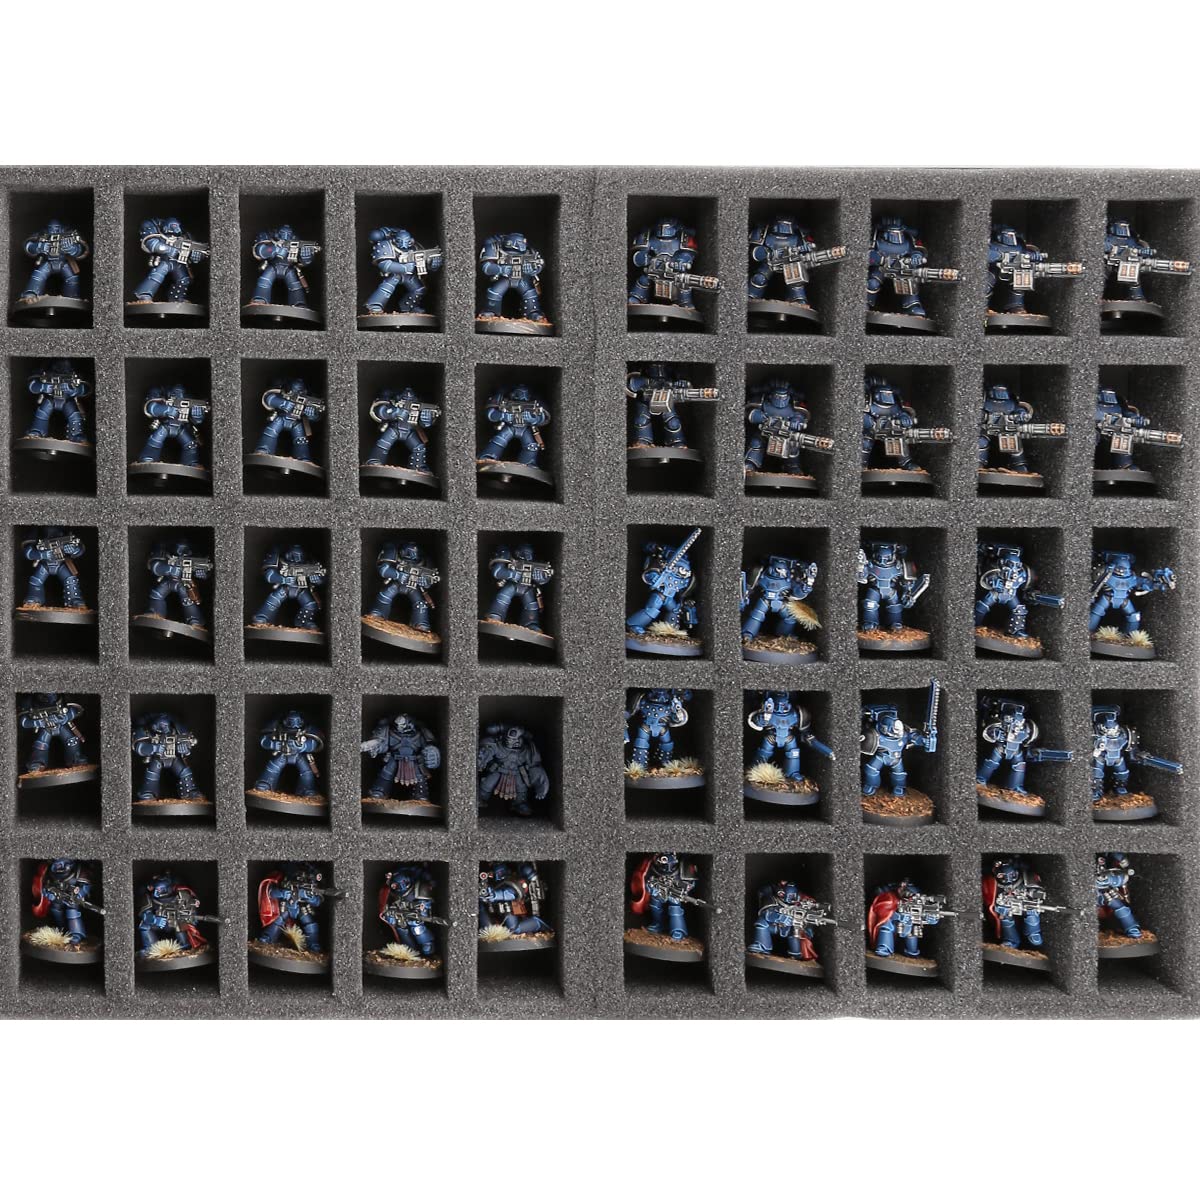 Jucoci Miniatures Storage Case for Wargame (Miniature Not Included)